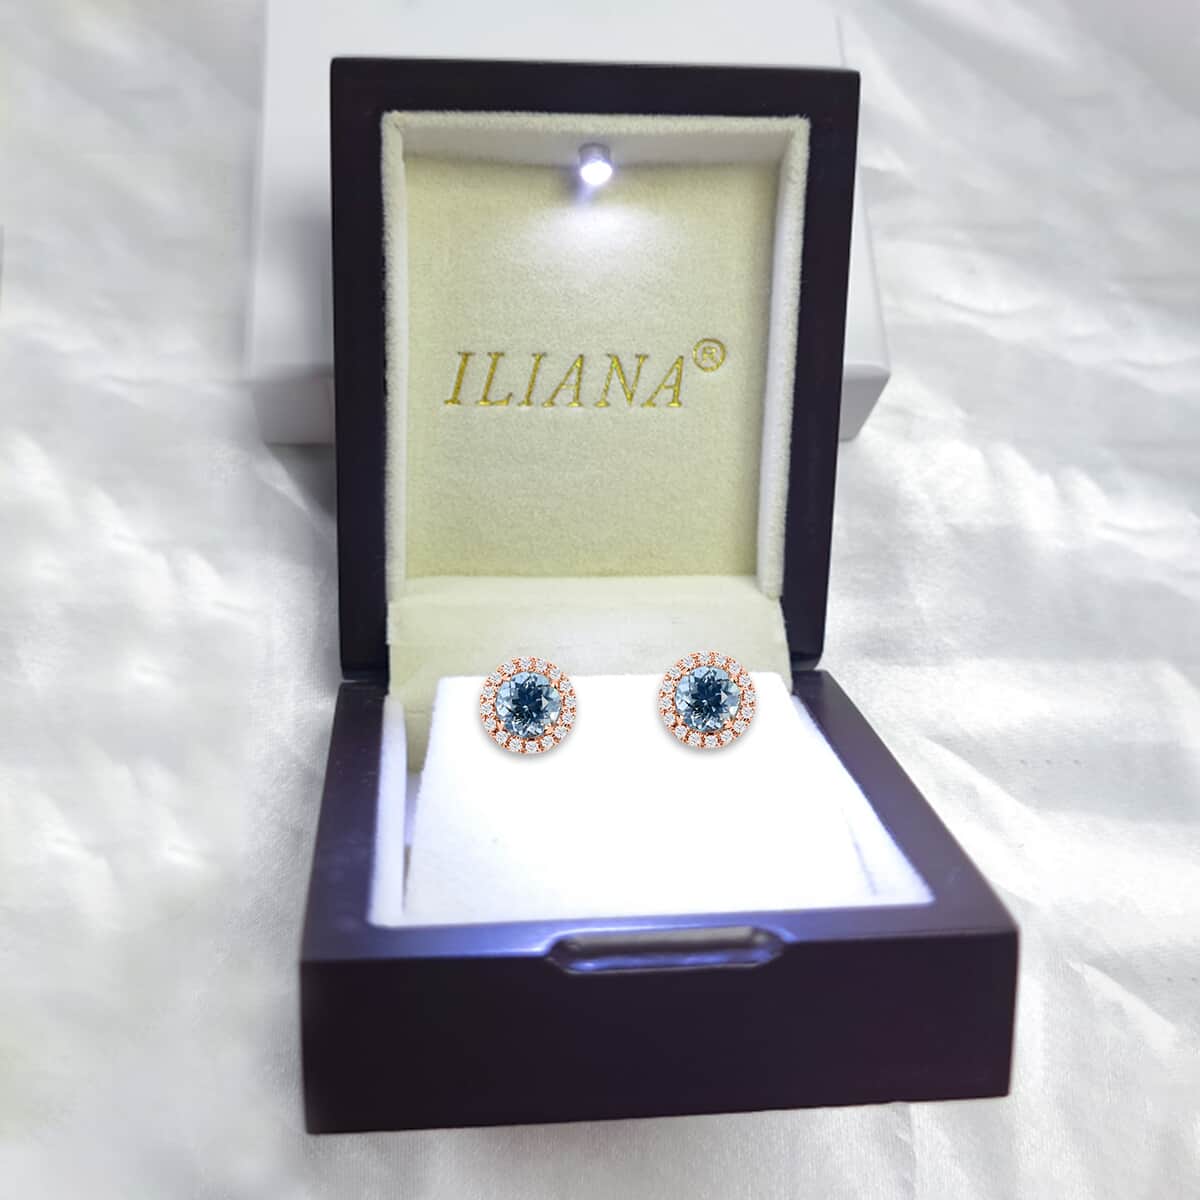 Certified & Appraised Iliana 18K Rose Gold AAA Santa Maria Aquamarine and G-H SI Diamond Halo Stud Earrings, Diamond Halo Earrings, Aquamarine Earrings, 18K White Gold Earrings 1.20 ctw image number 6